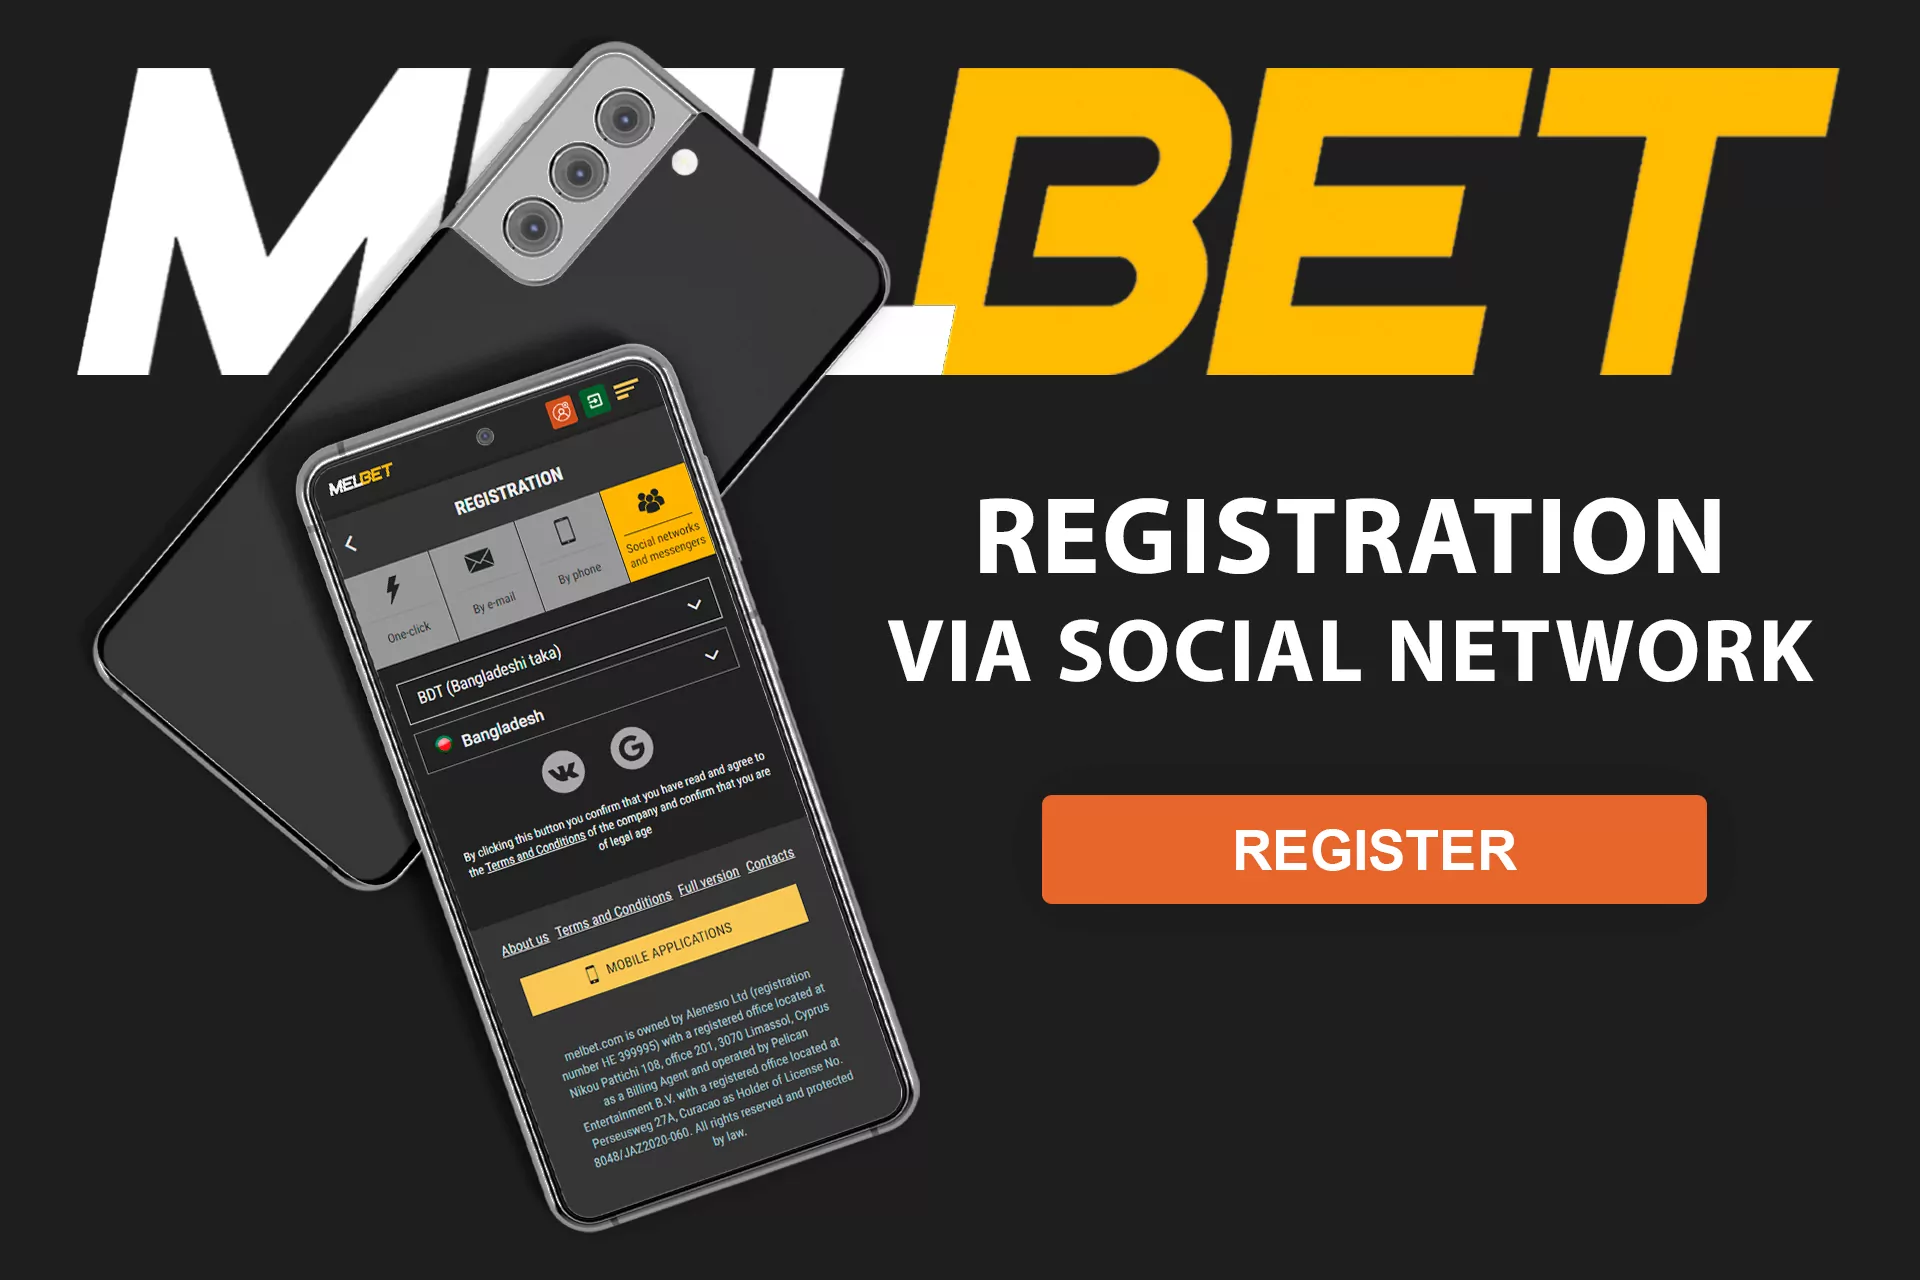 You can quickly register at Melbet with a social network account.